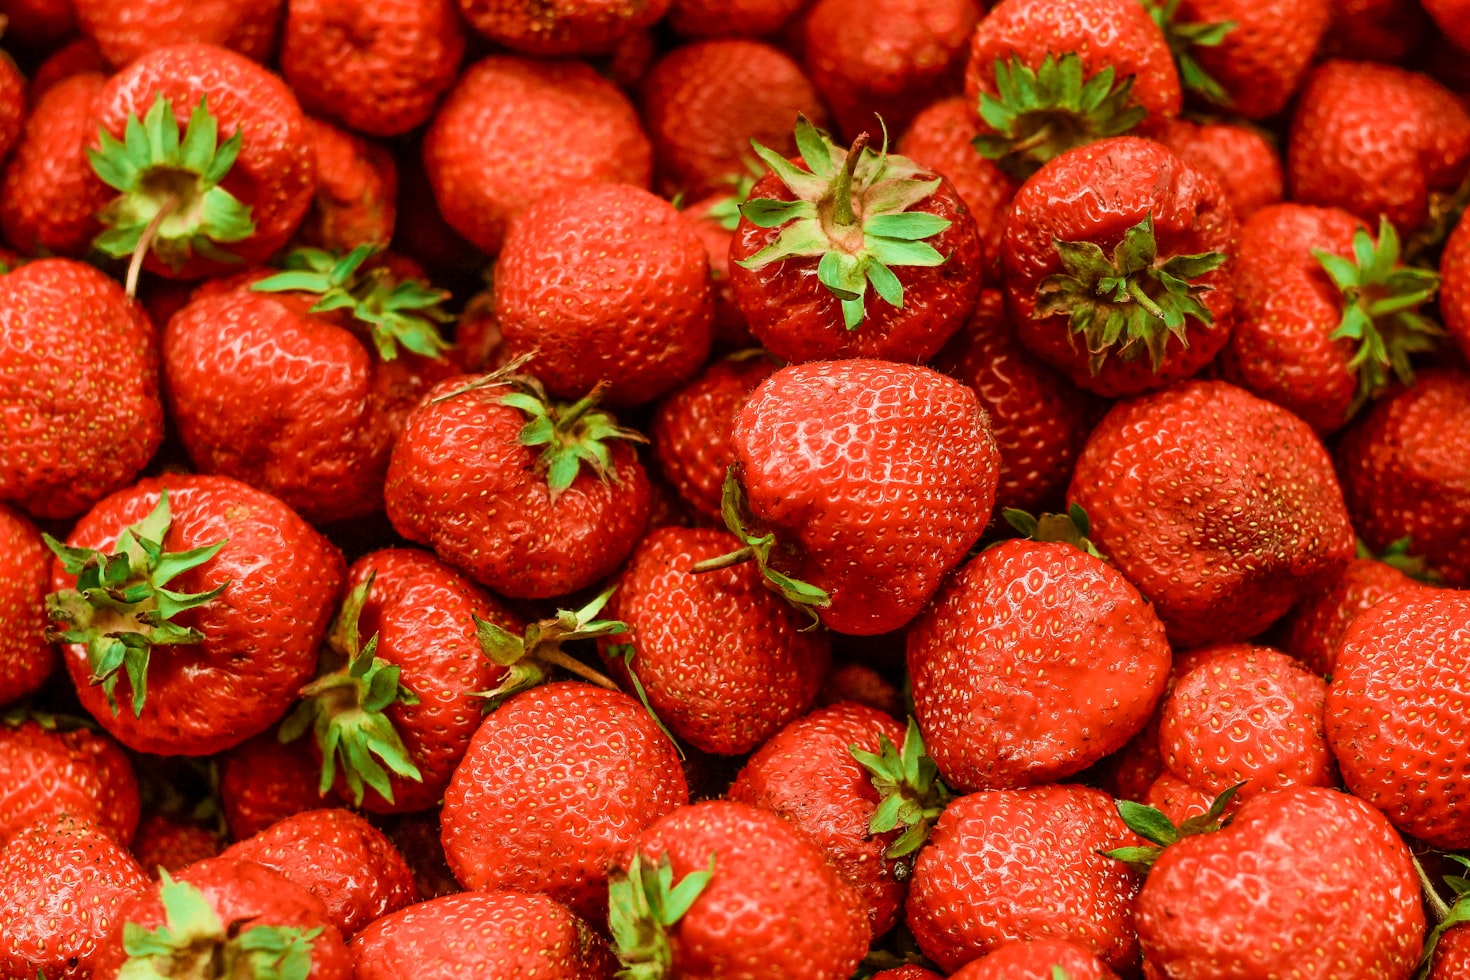 image from Savoring Sweet Success Growing Strawberries With Hydroponics